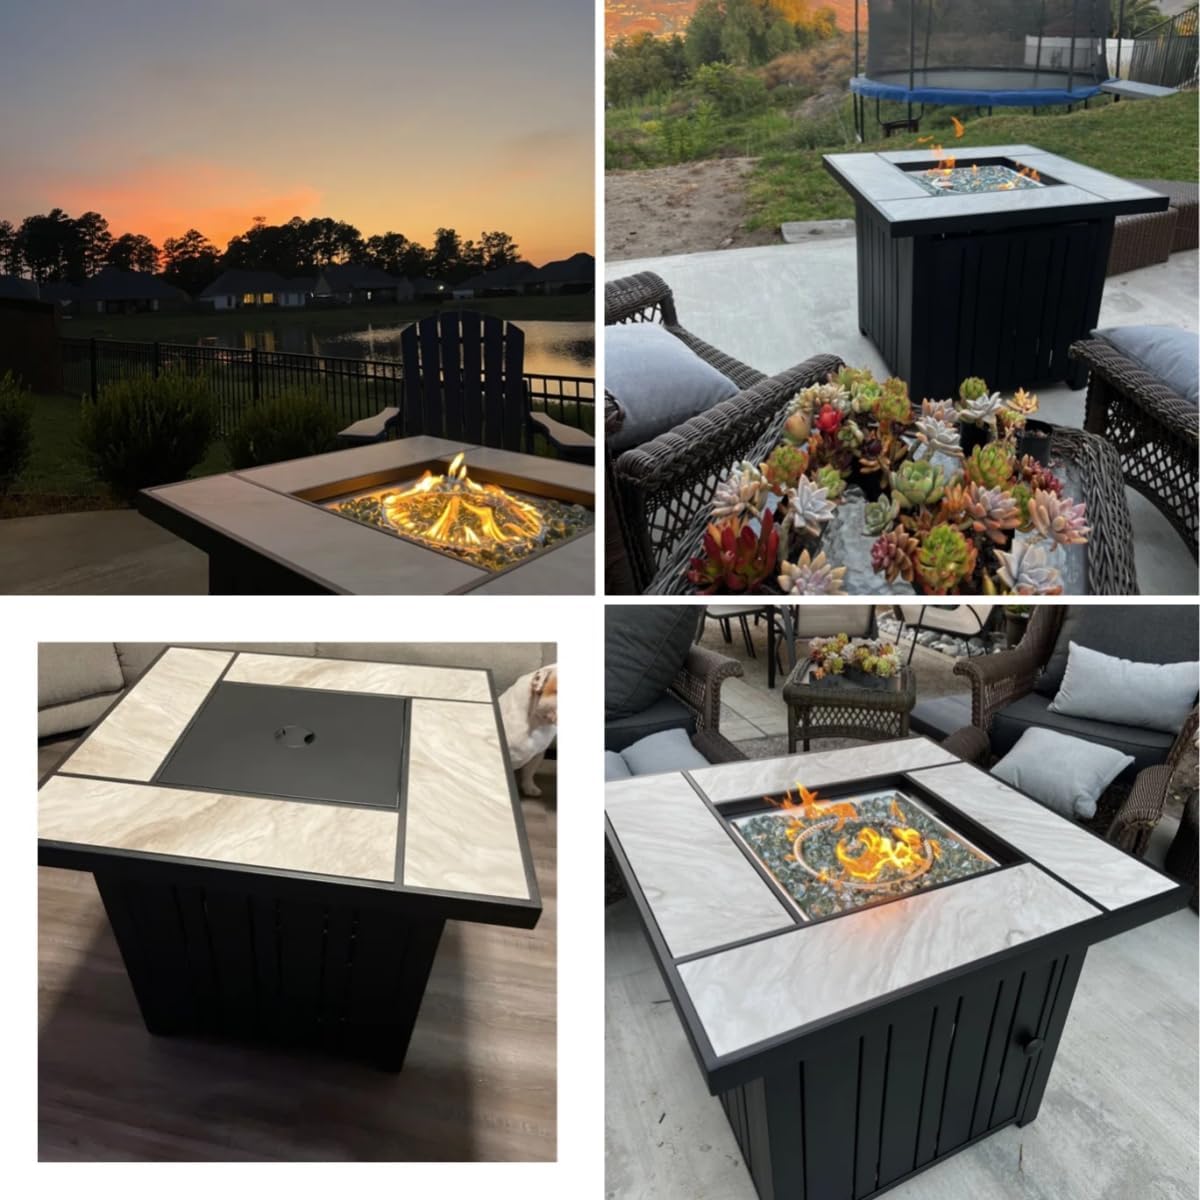 OutVue 30″ Propane Fire Pit Review